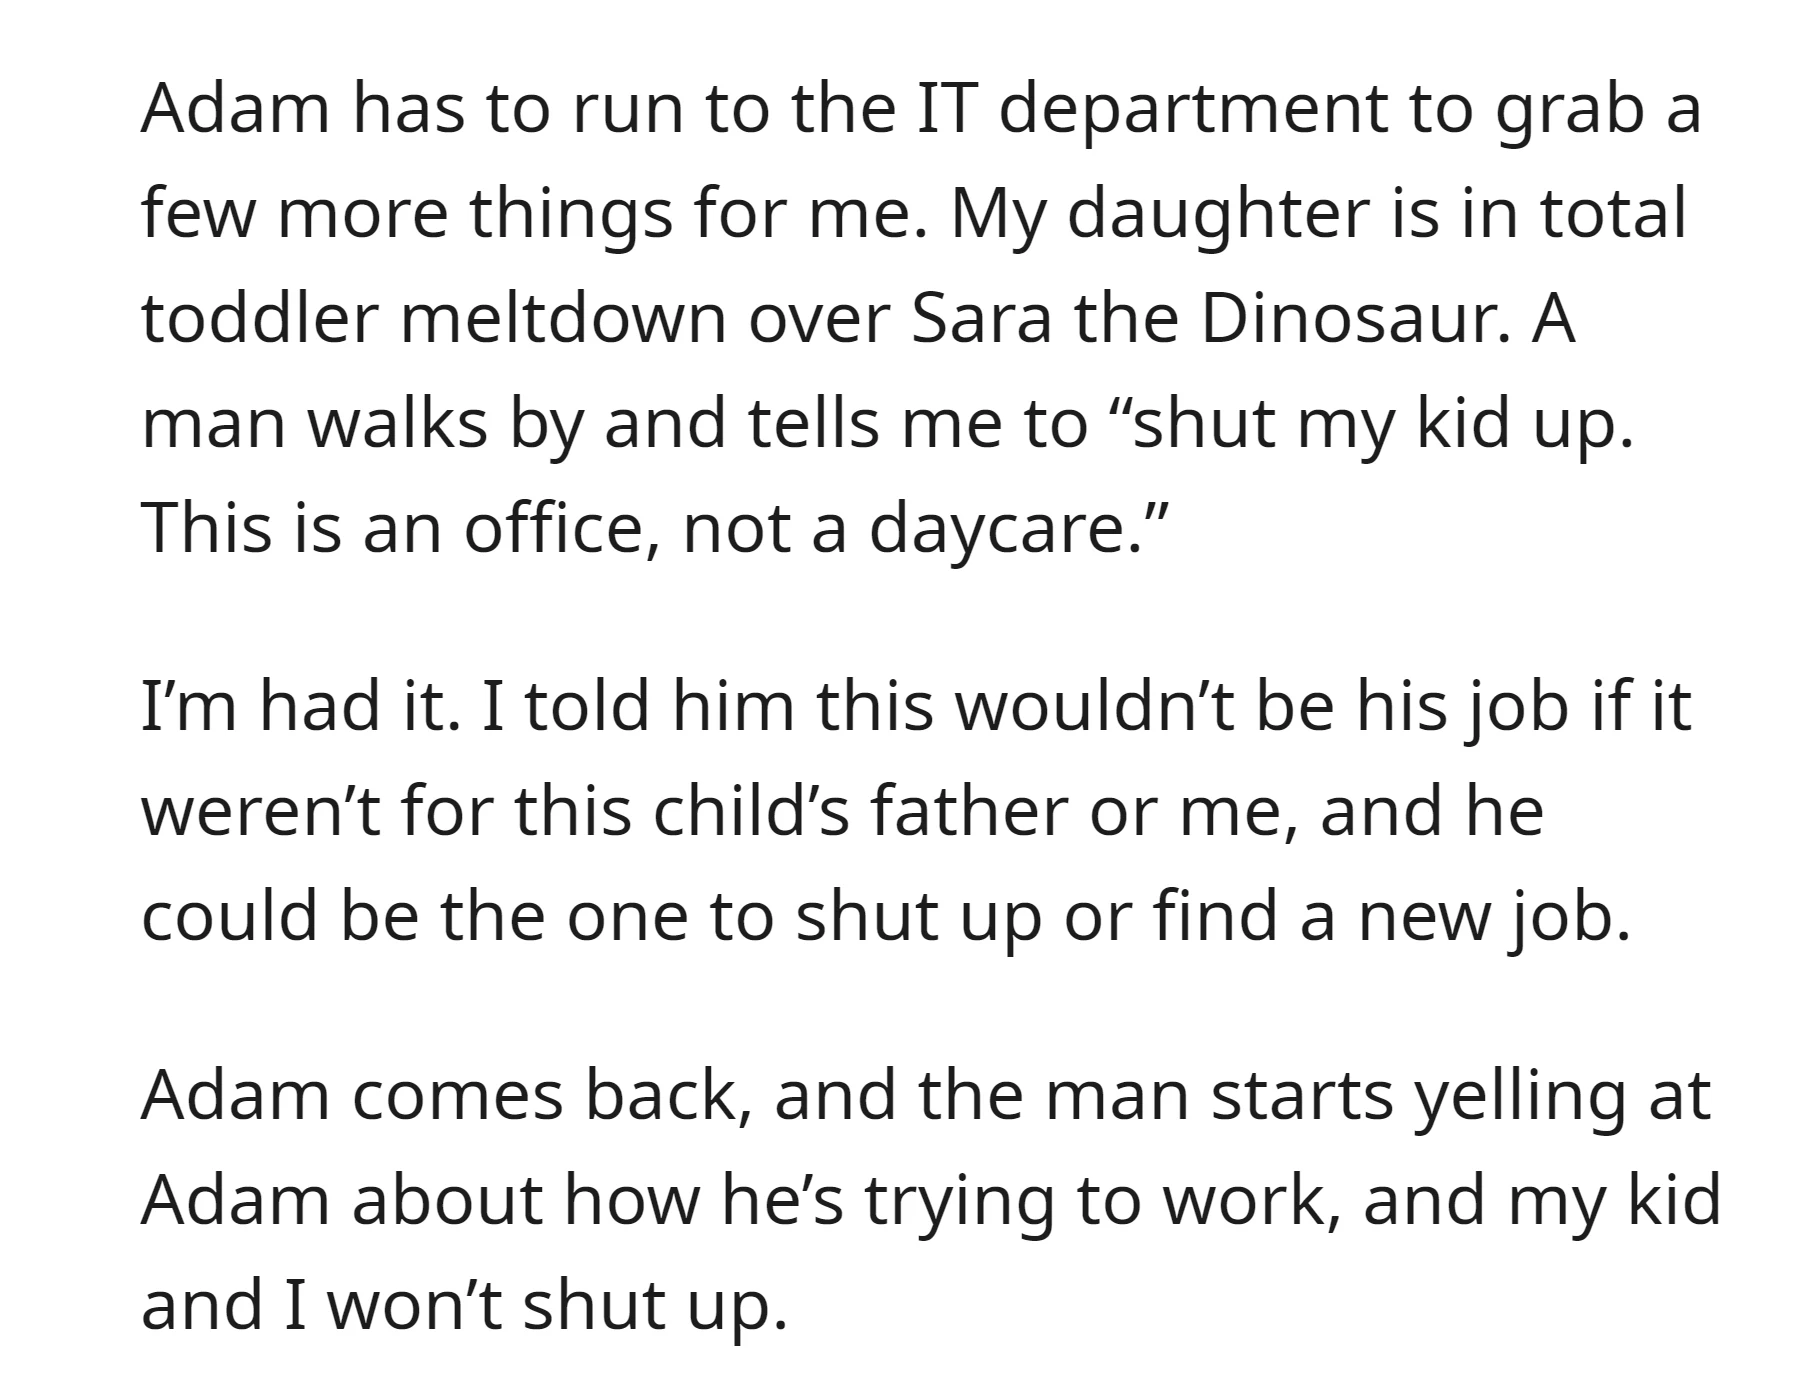 OP's toddler has a meltdown over a toy, a passerby threw a rude comment in the office